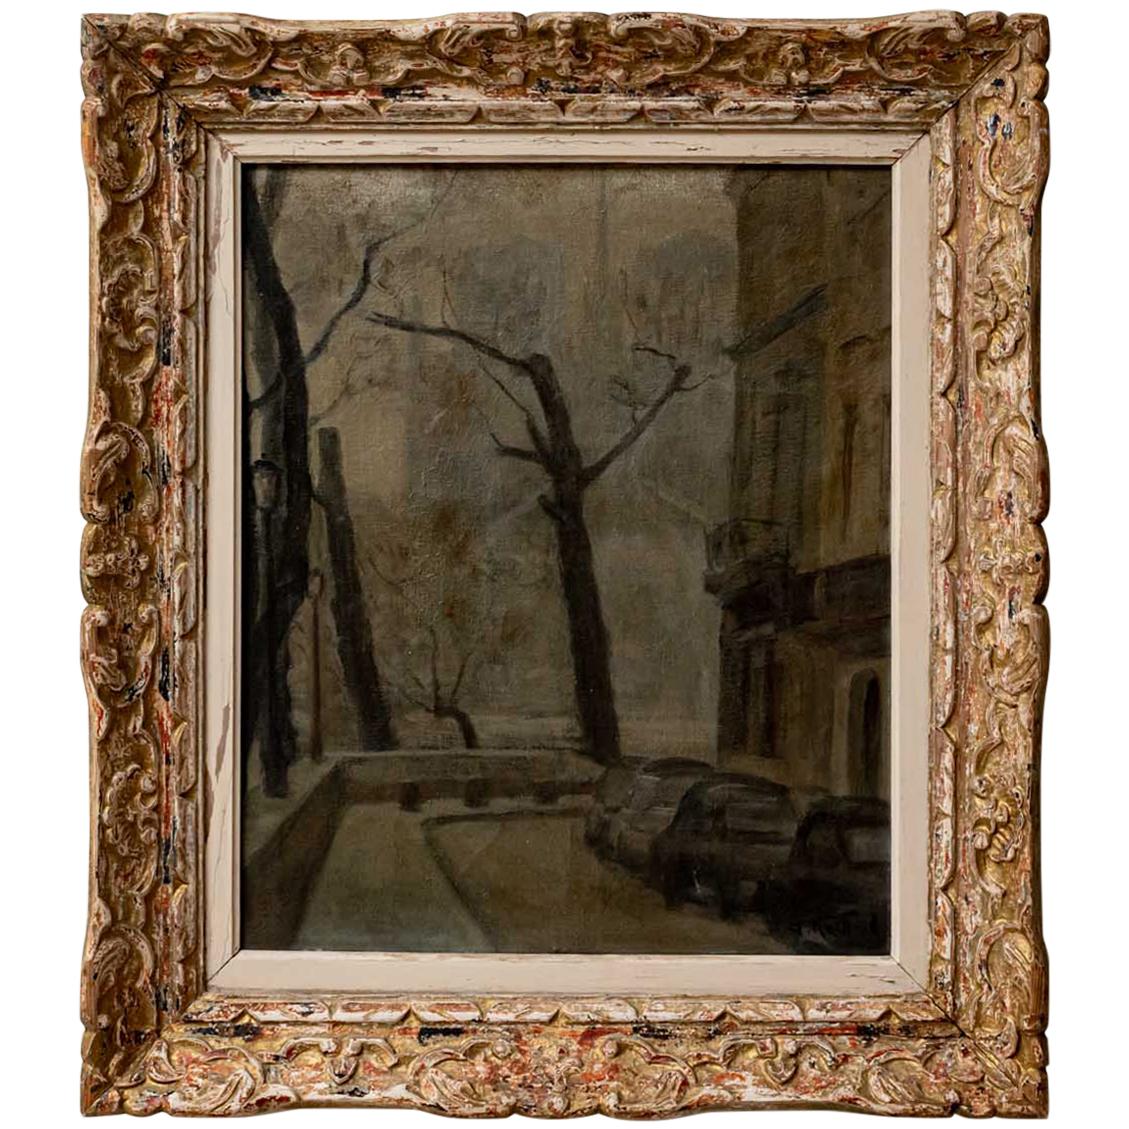 1950s French Oil Painting of a Parisian Scene in a Beautiful Carved Wood Frame